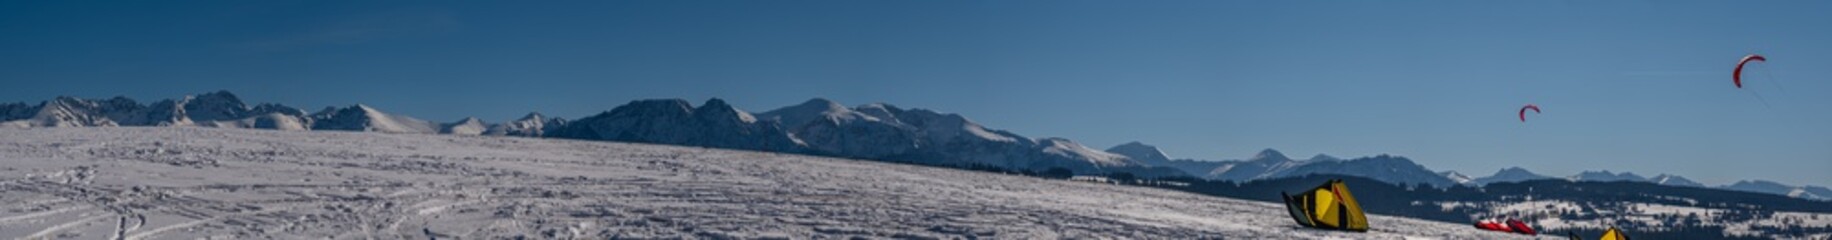 winter panorama of the Tatra mountains viewed from the north